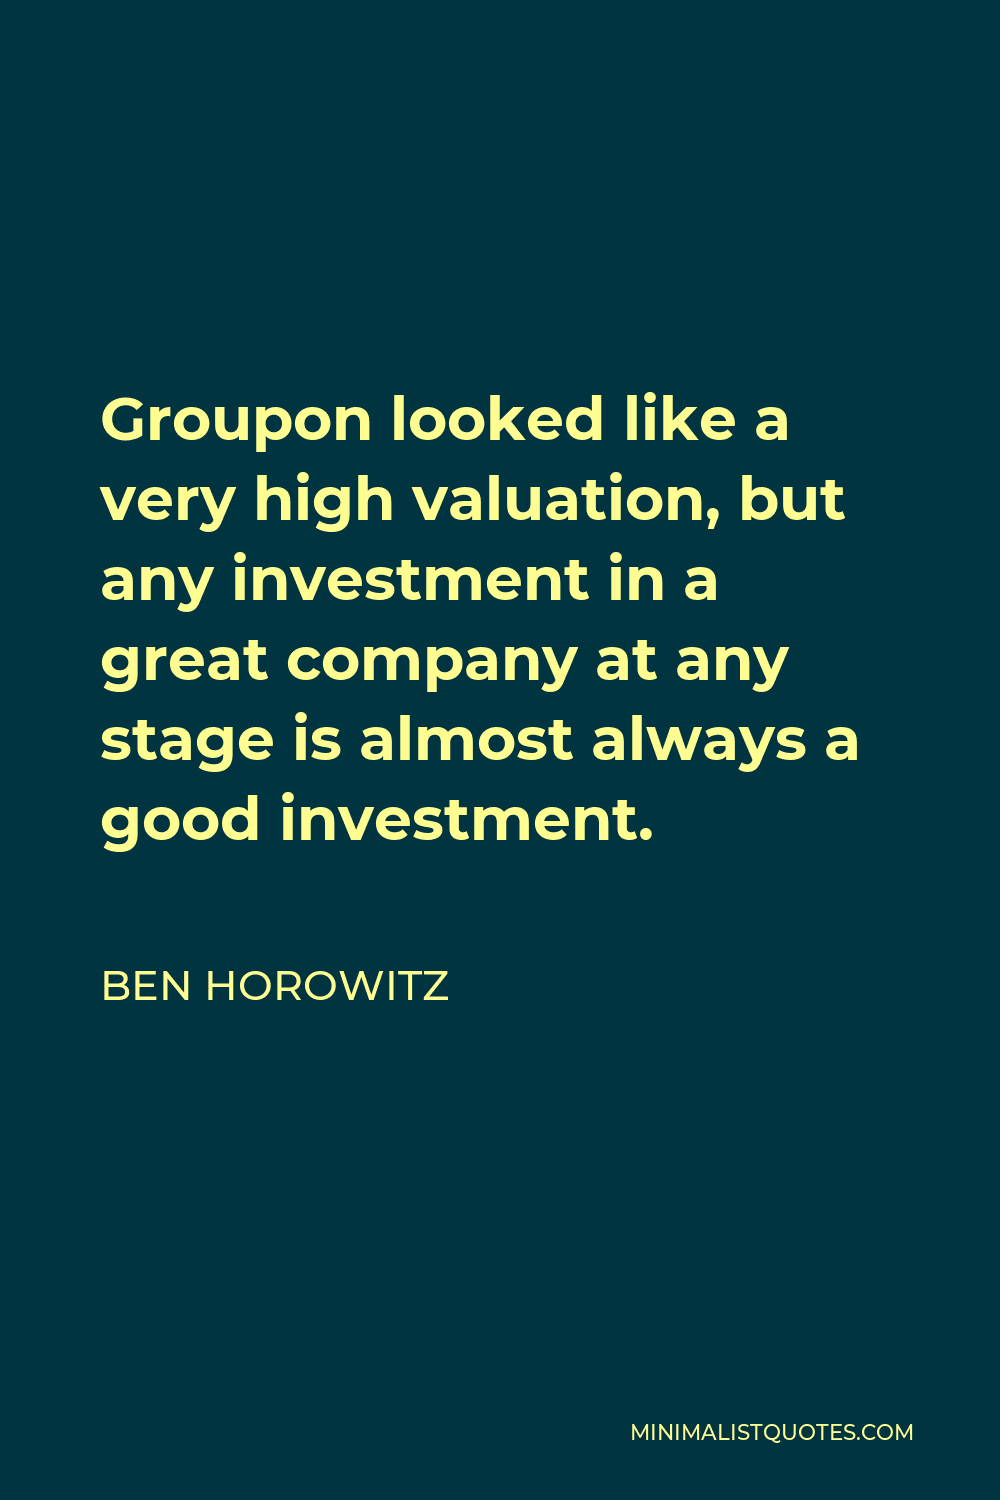 Ben Horowitz Quote - Groupon looked like a very high valuation, but any investment in a great company at any stage is almost always a good investment.